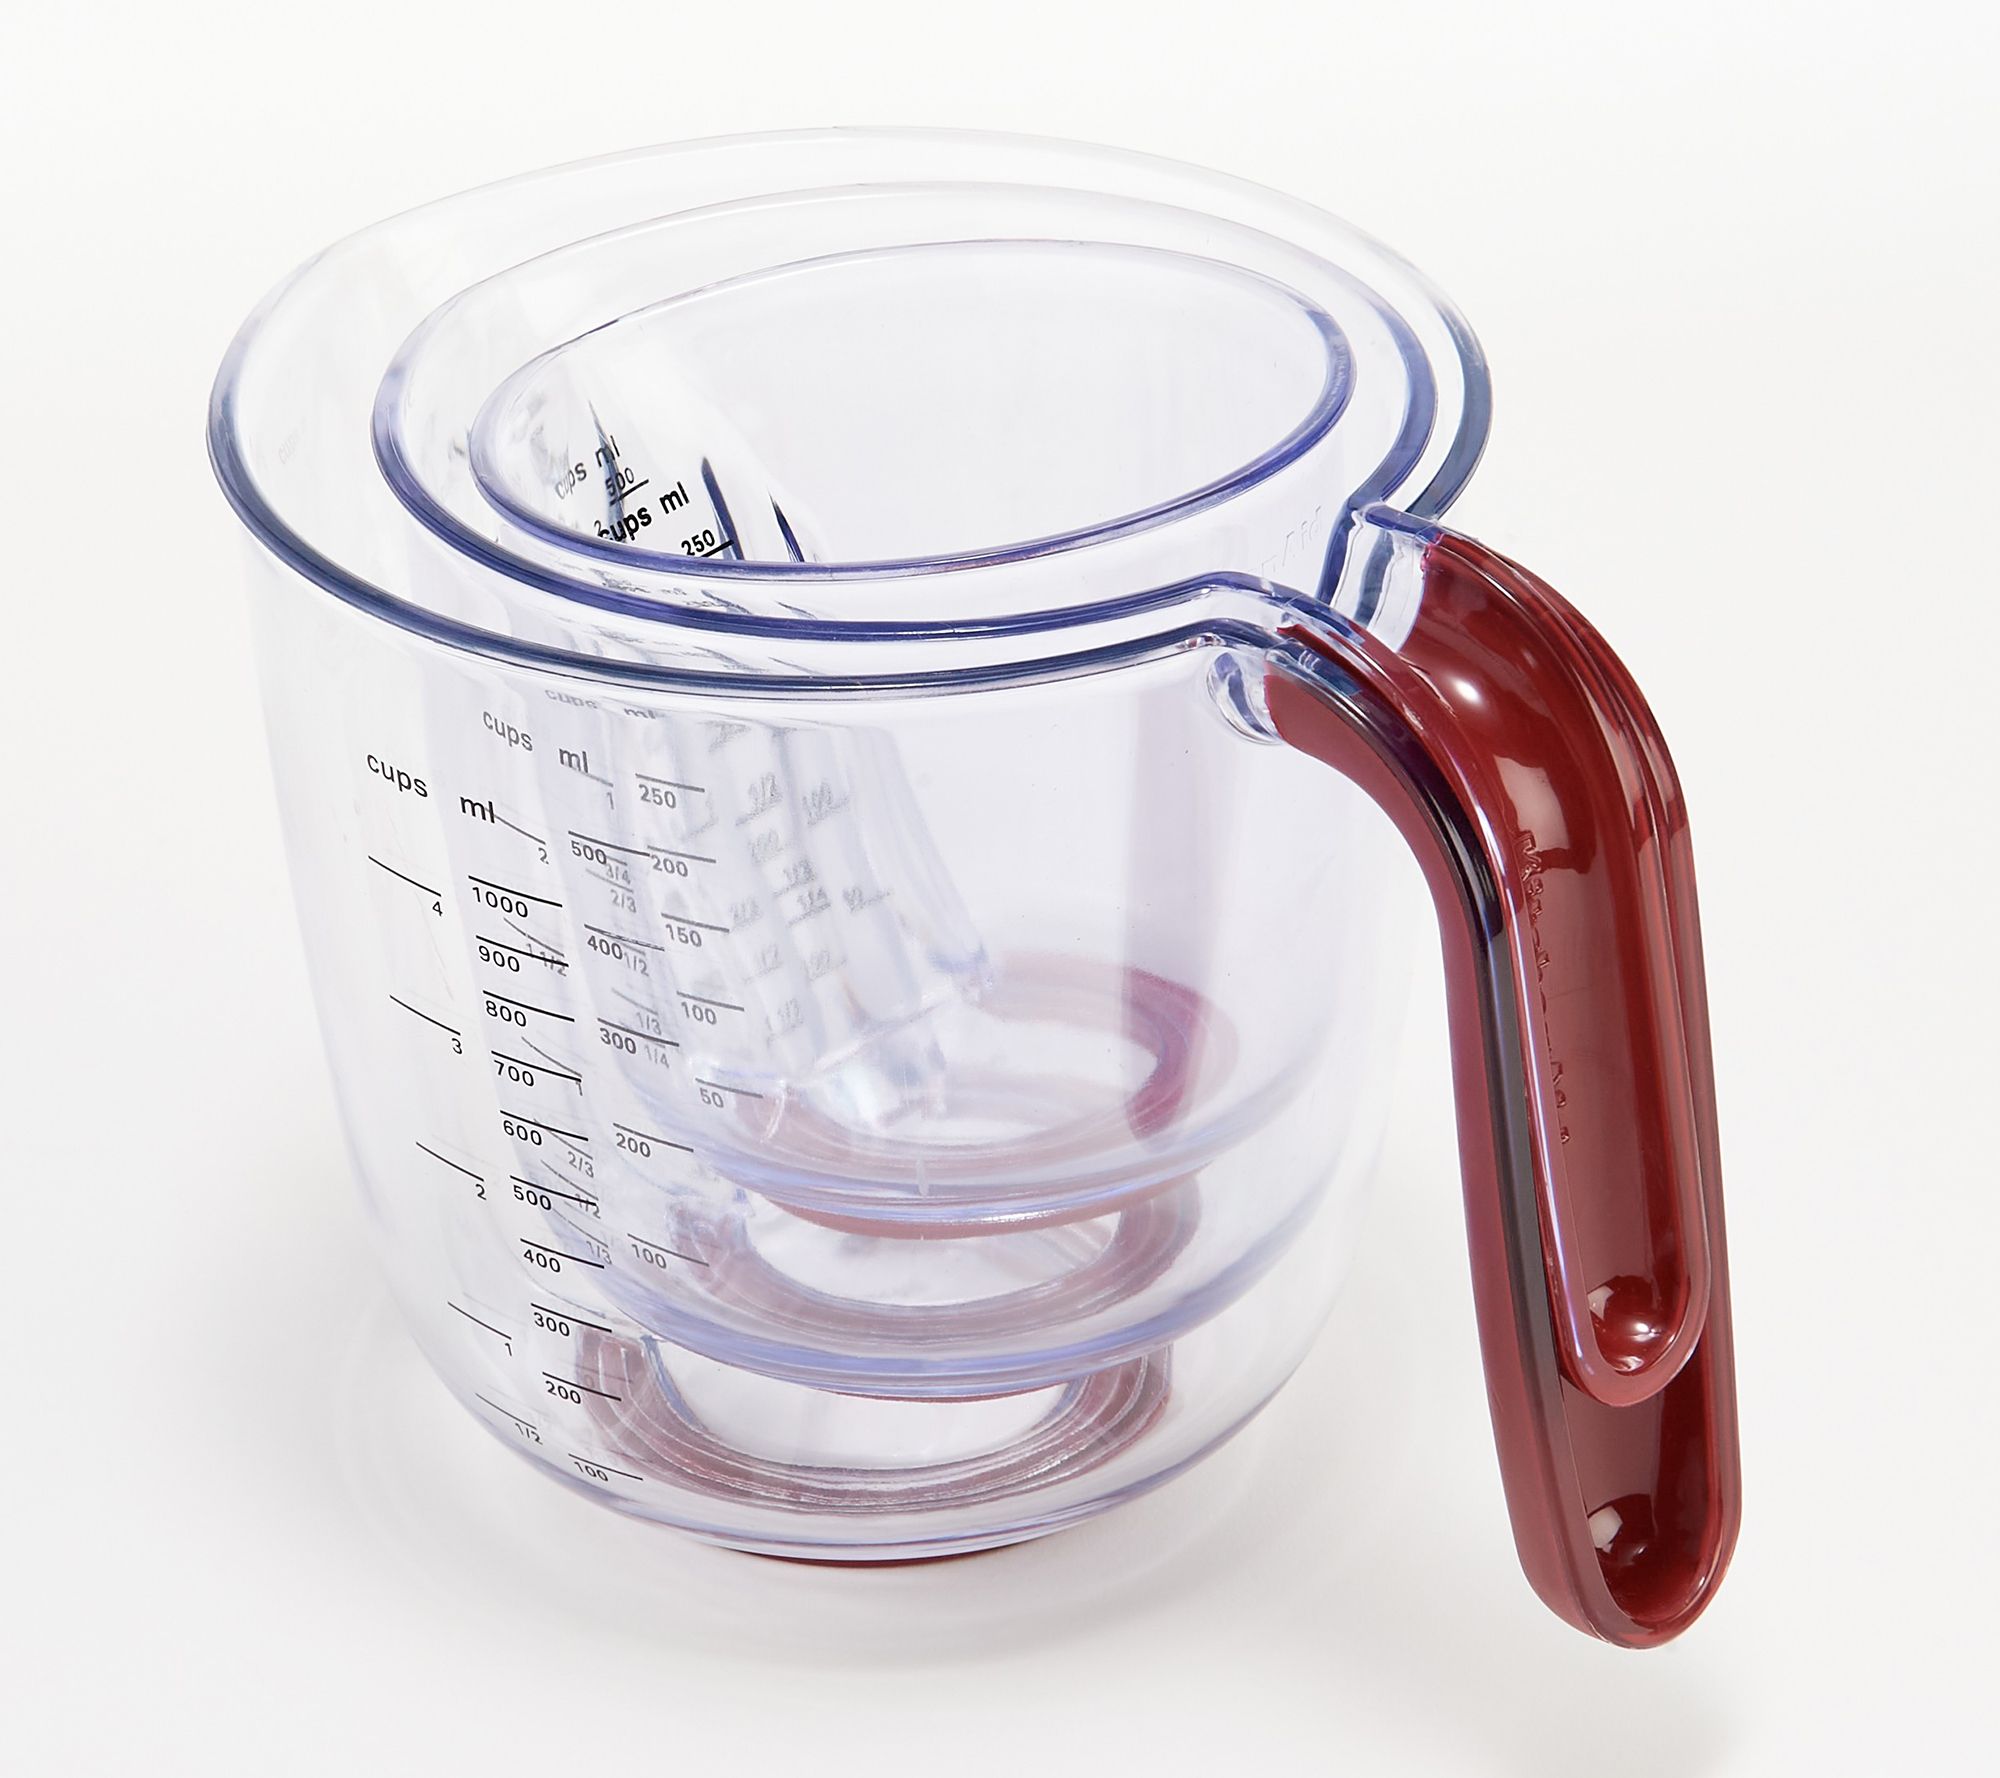 Over 15,000  Shoppers Swear by These KitchenAid Measuring Cups, and  Now They're 56% Off